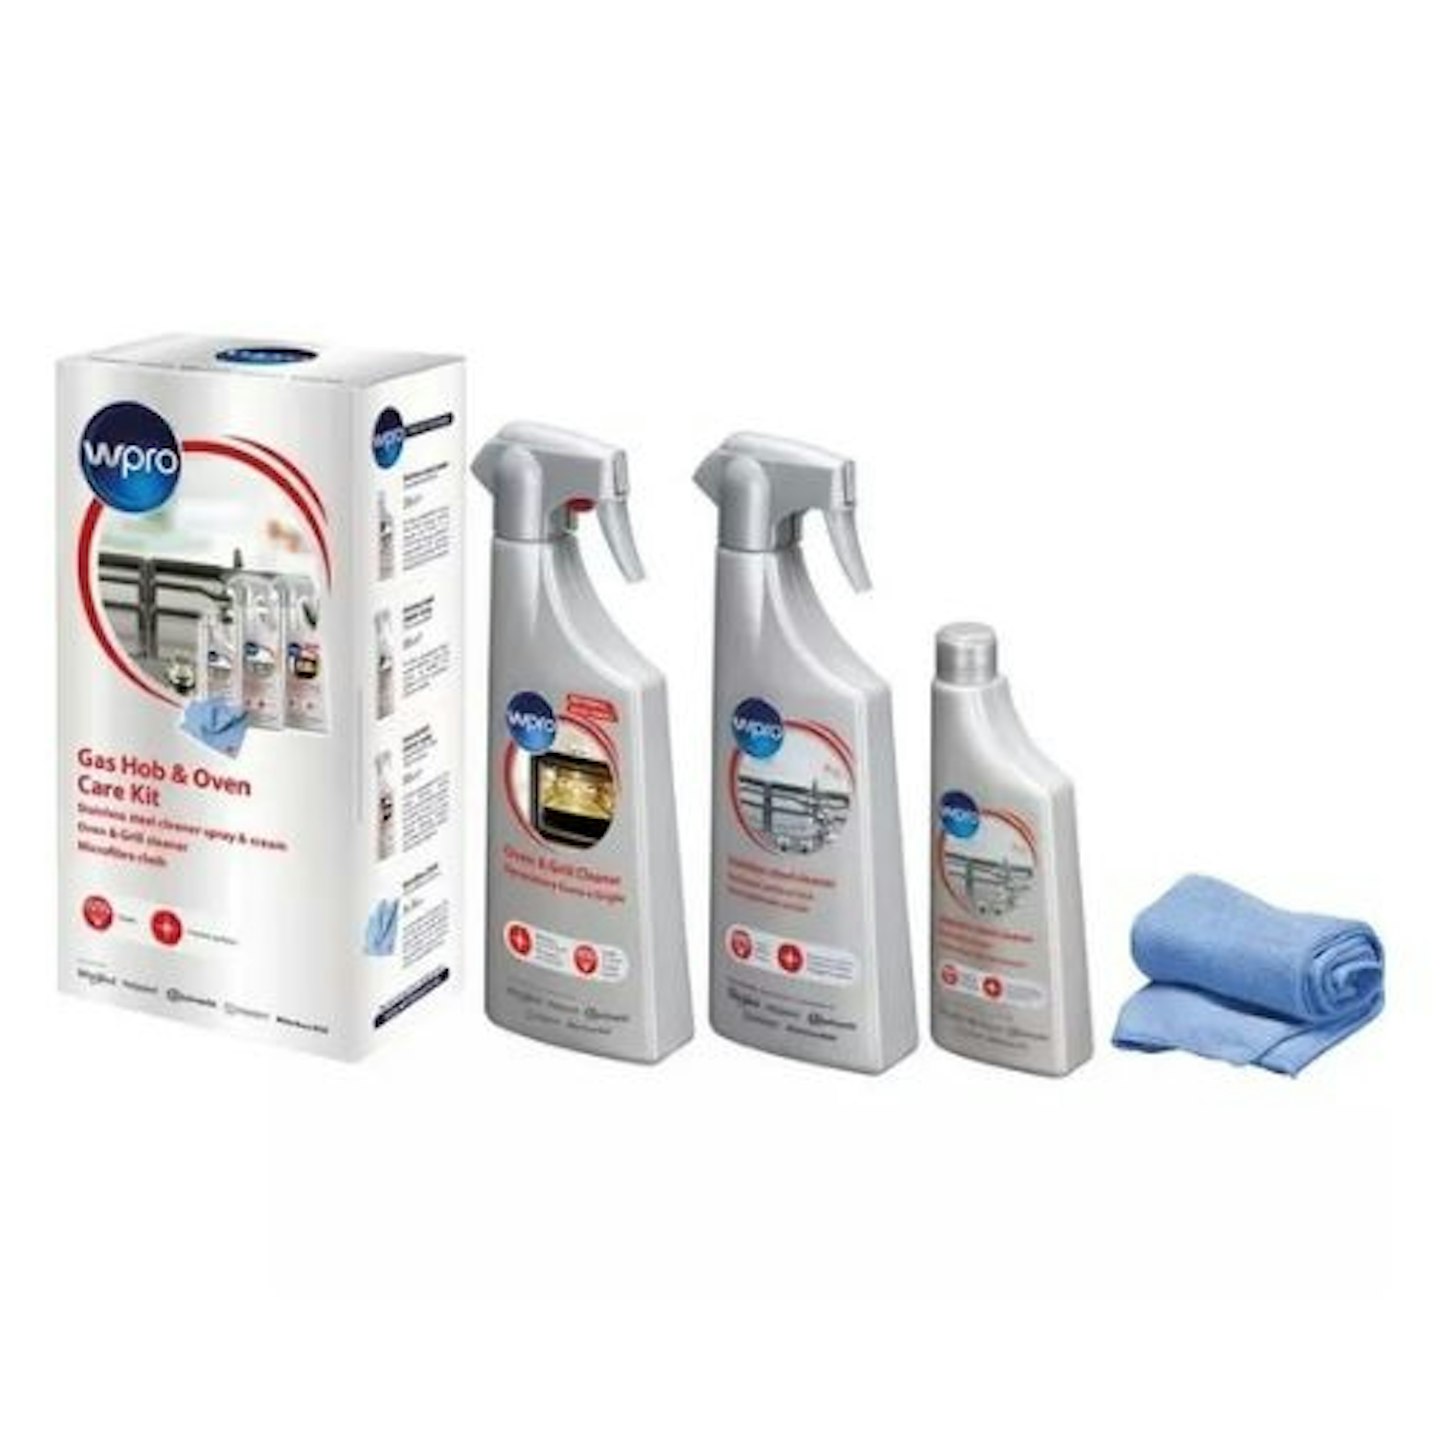 WPRO Gas, Hob & Oven Care Kit 